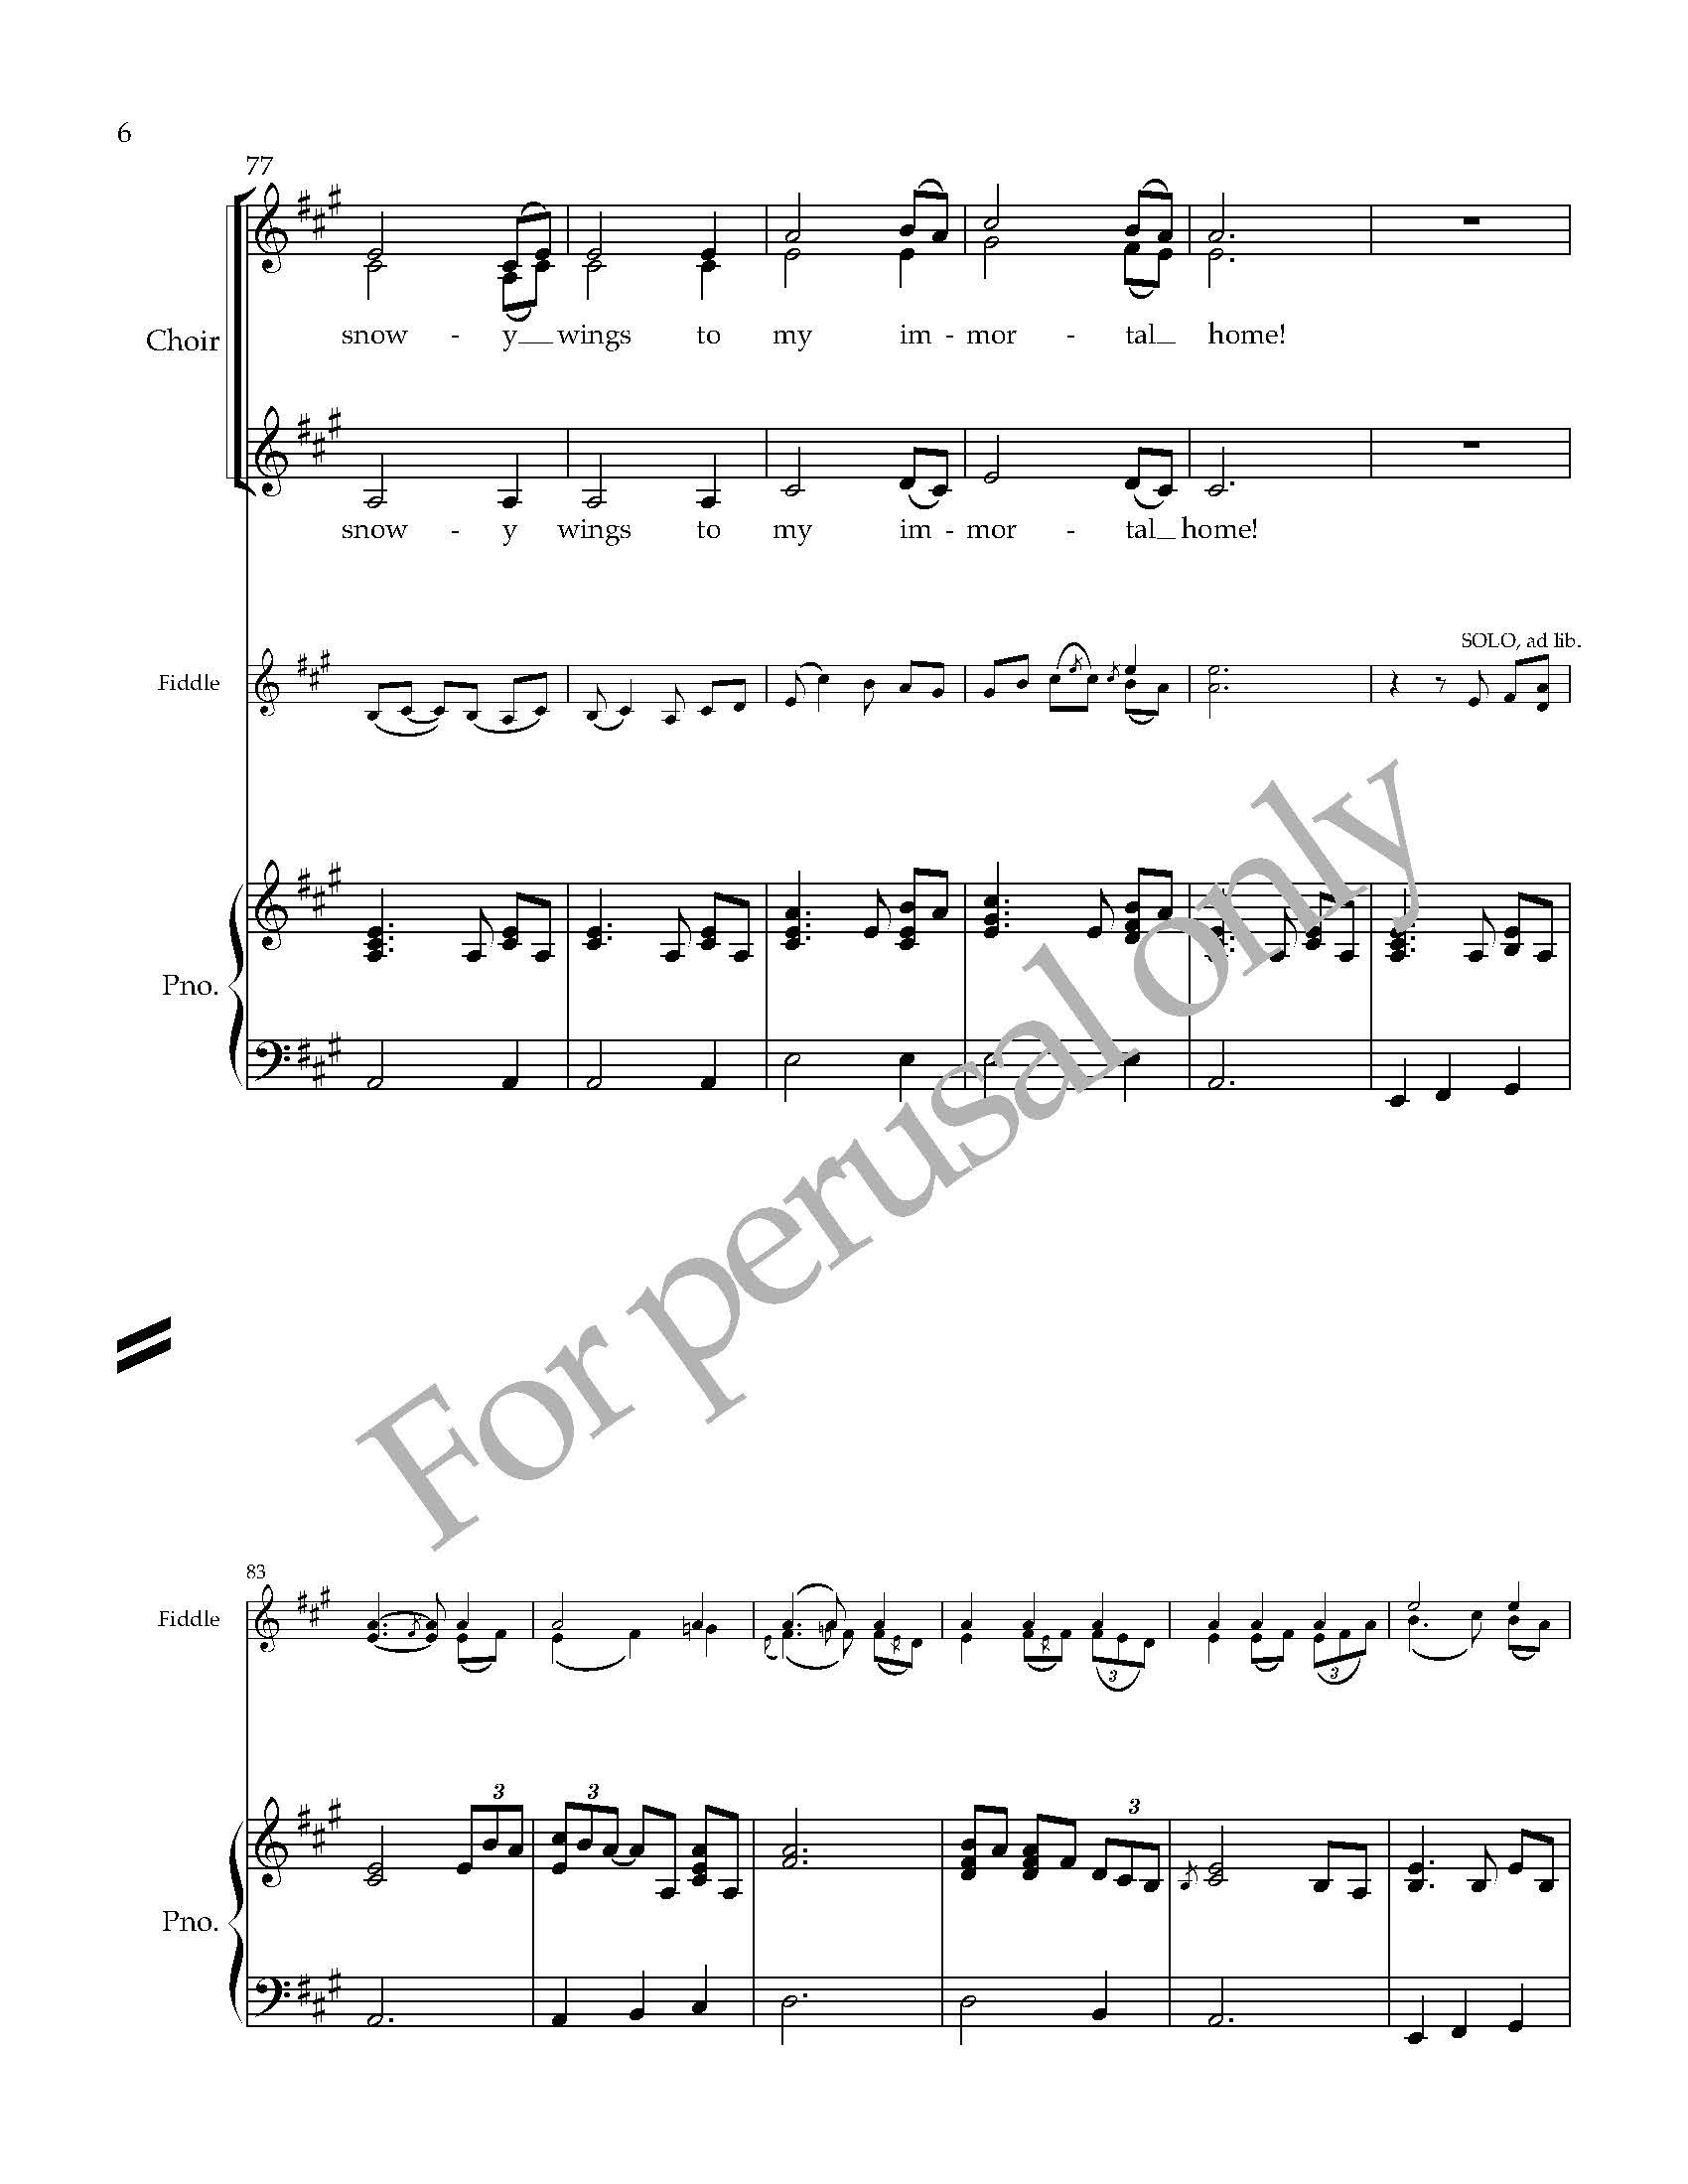 VOCAL SCORE  preview- Angel Band for three-part choir, piano, fiddle, guitar, string bass - arr. Ryan James Brandau_Page_08.jpg